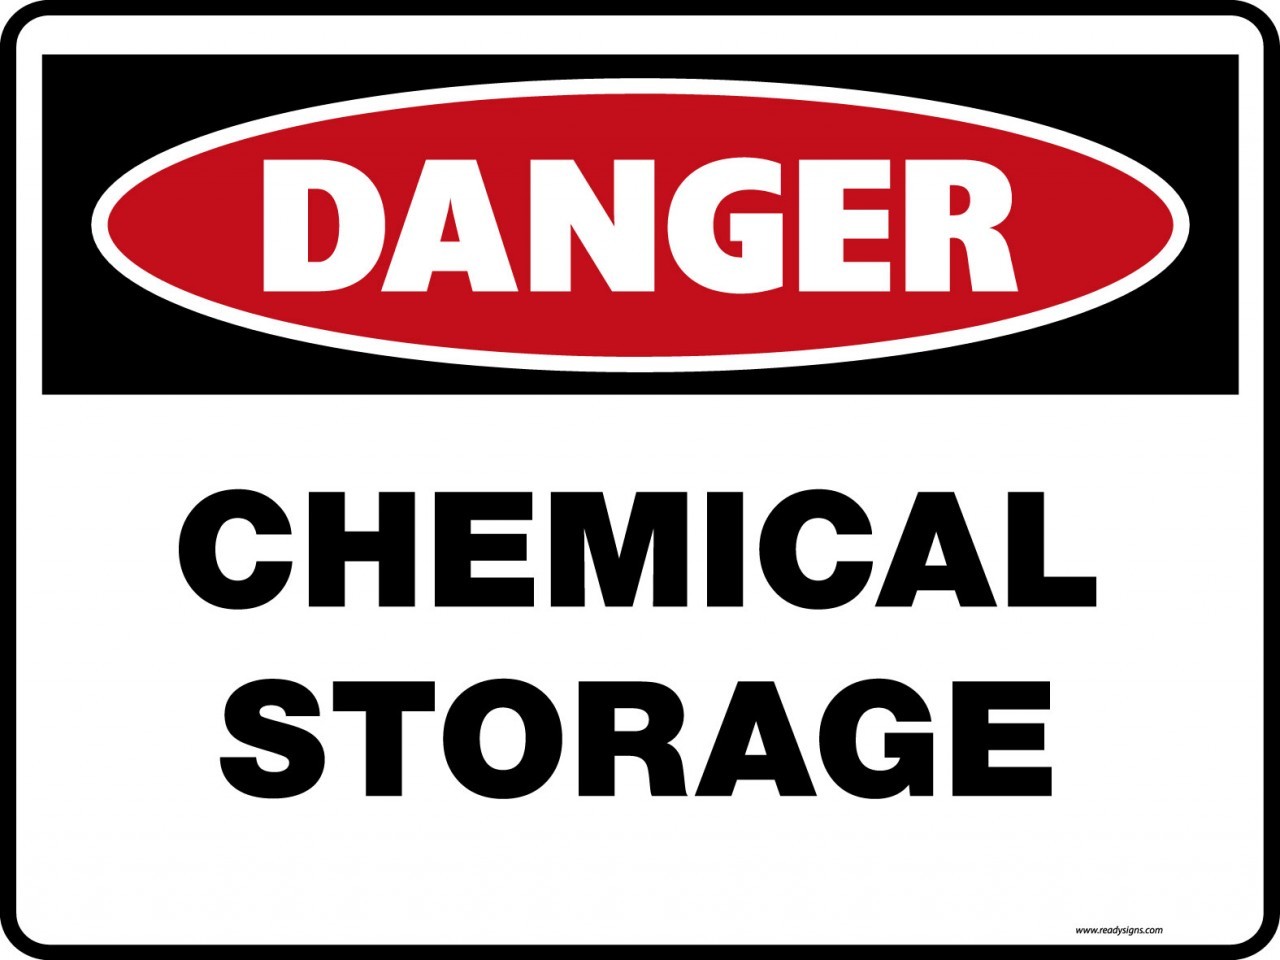 Danger Signs - Chemical Storage - Property Signs